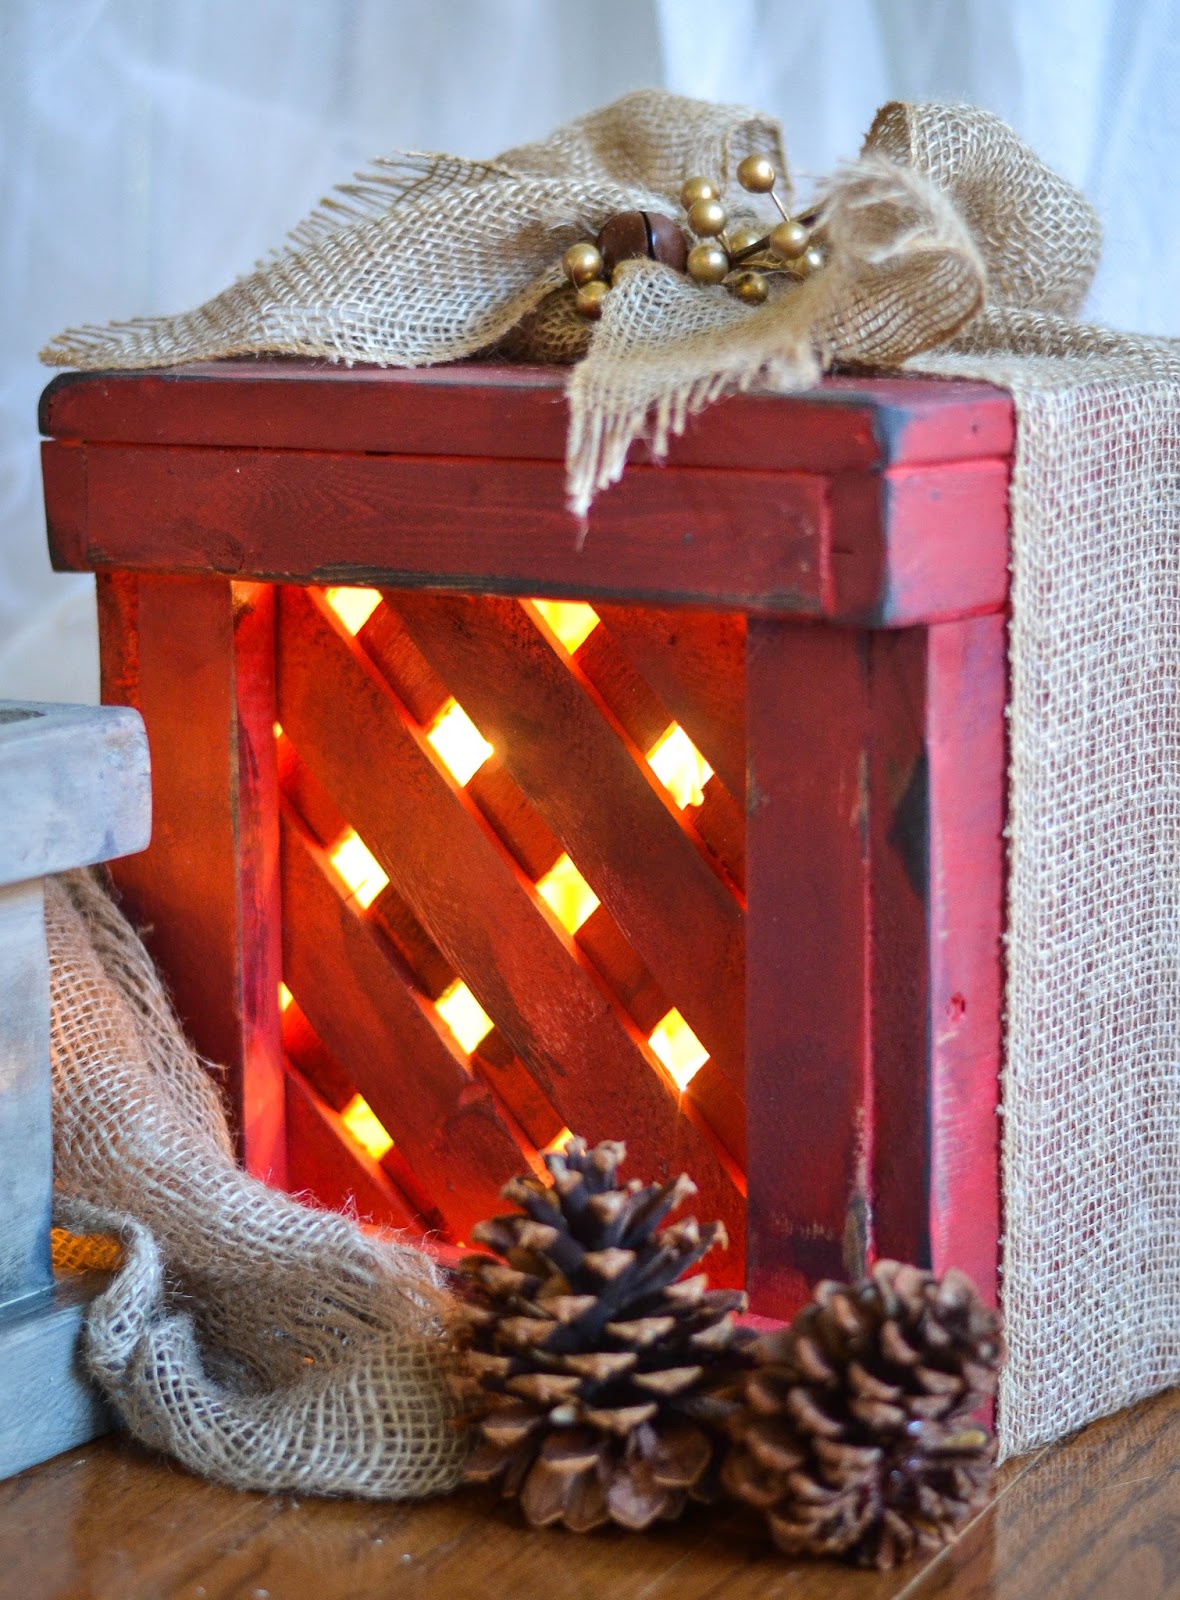 Down to Earth Style: Make Wooden Christmas Gift Box Decor